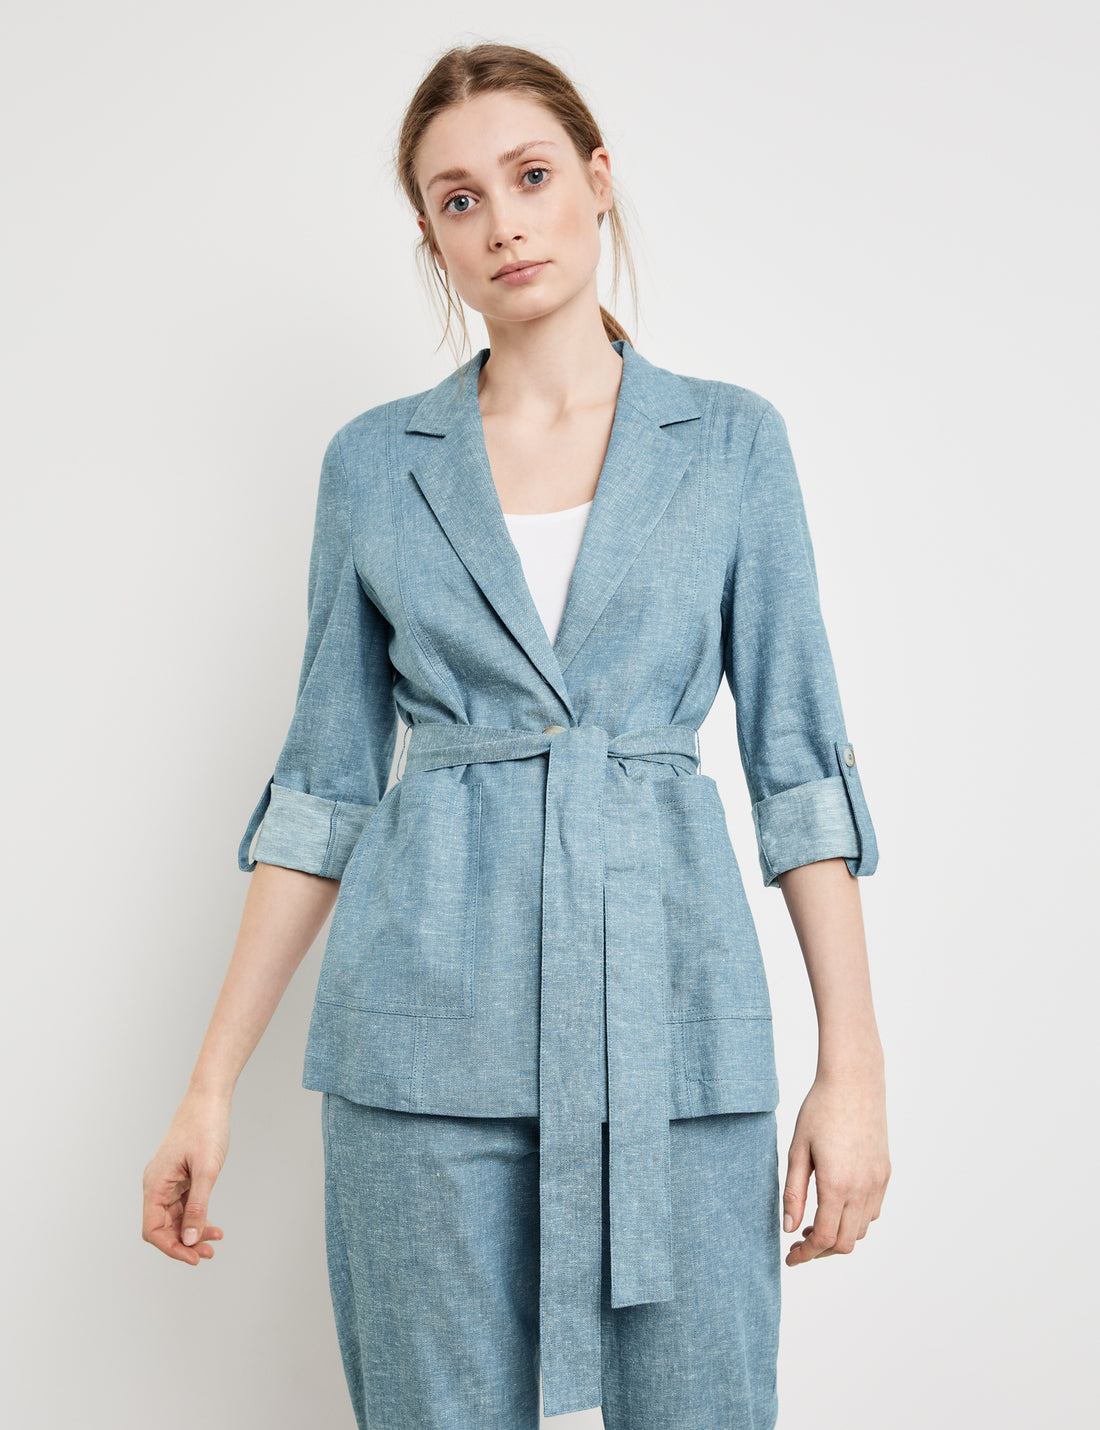 Blazer With 3/4-Length Sleeves, Made Of Blended Linen